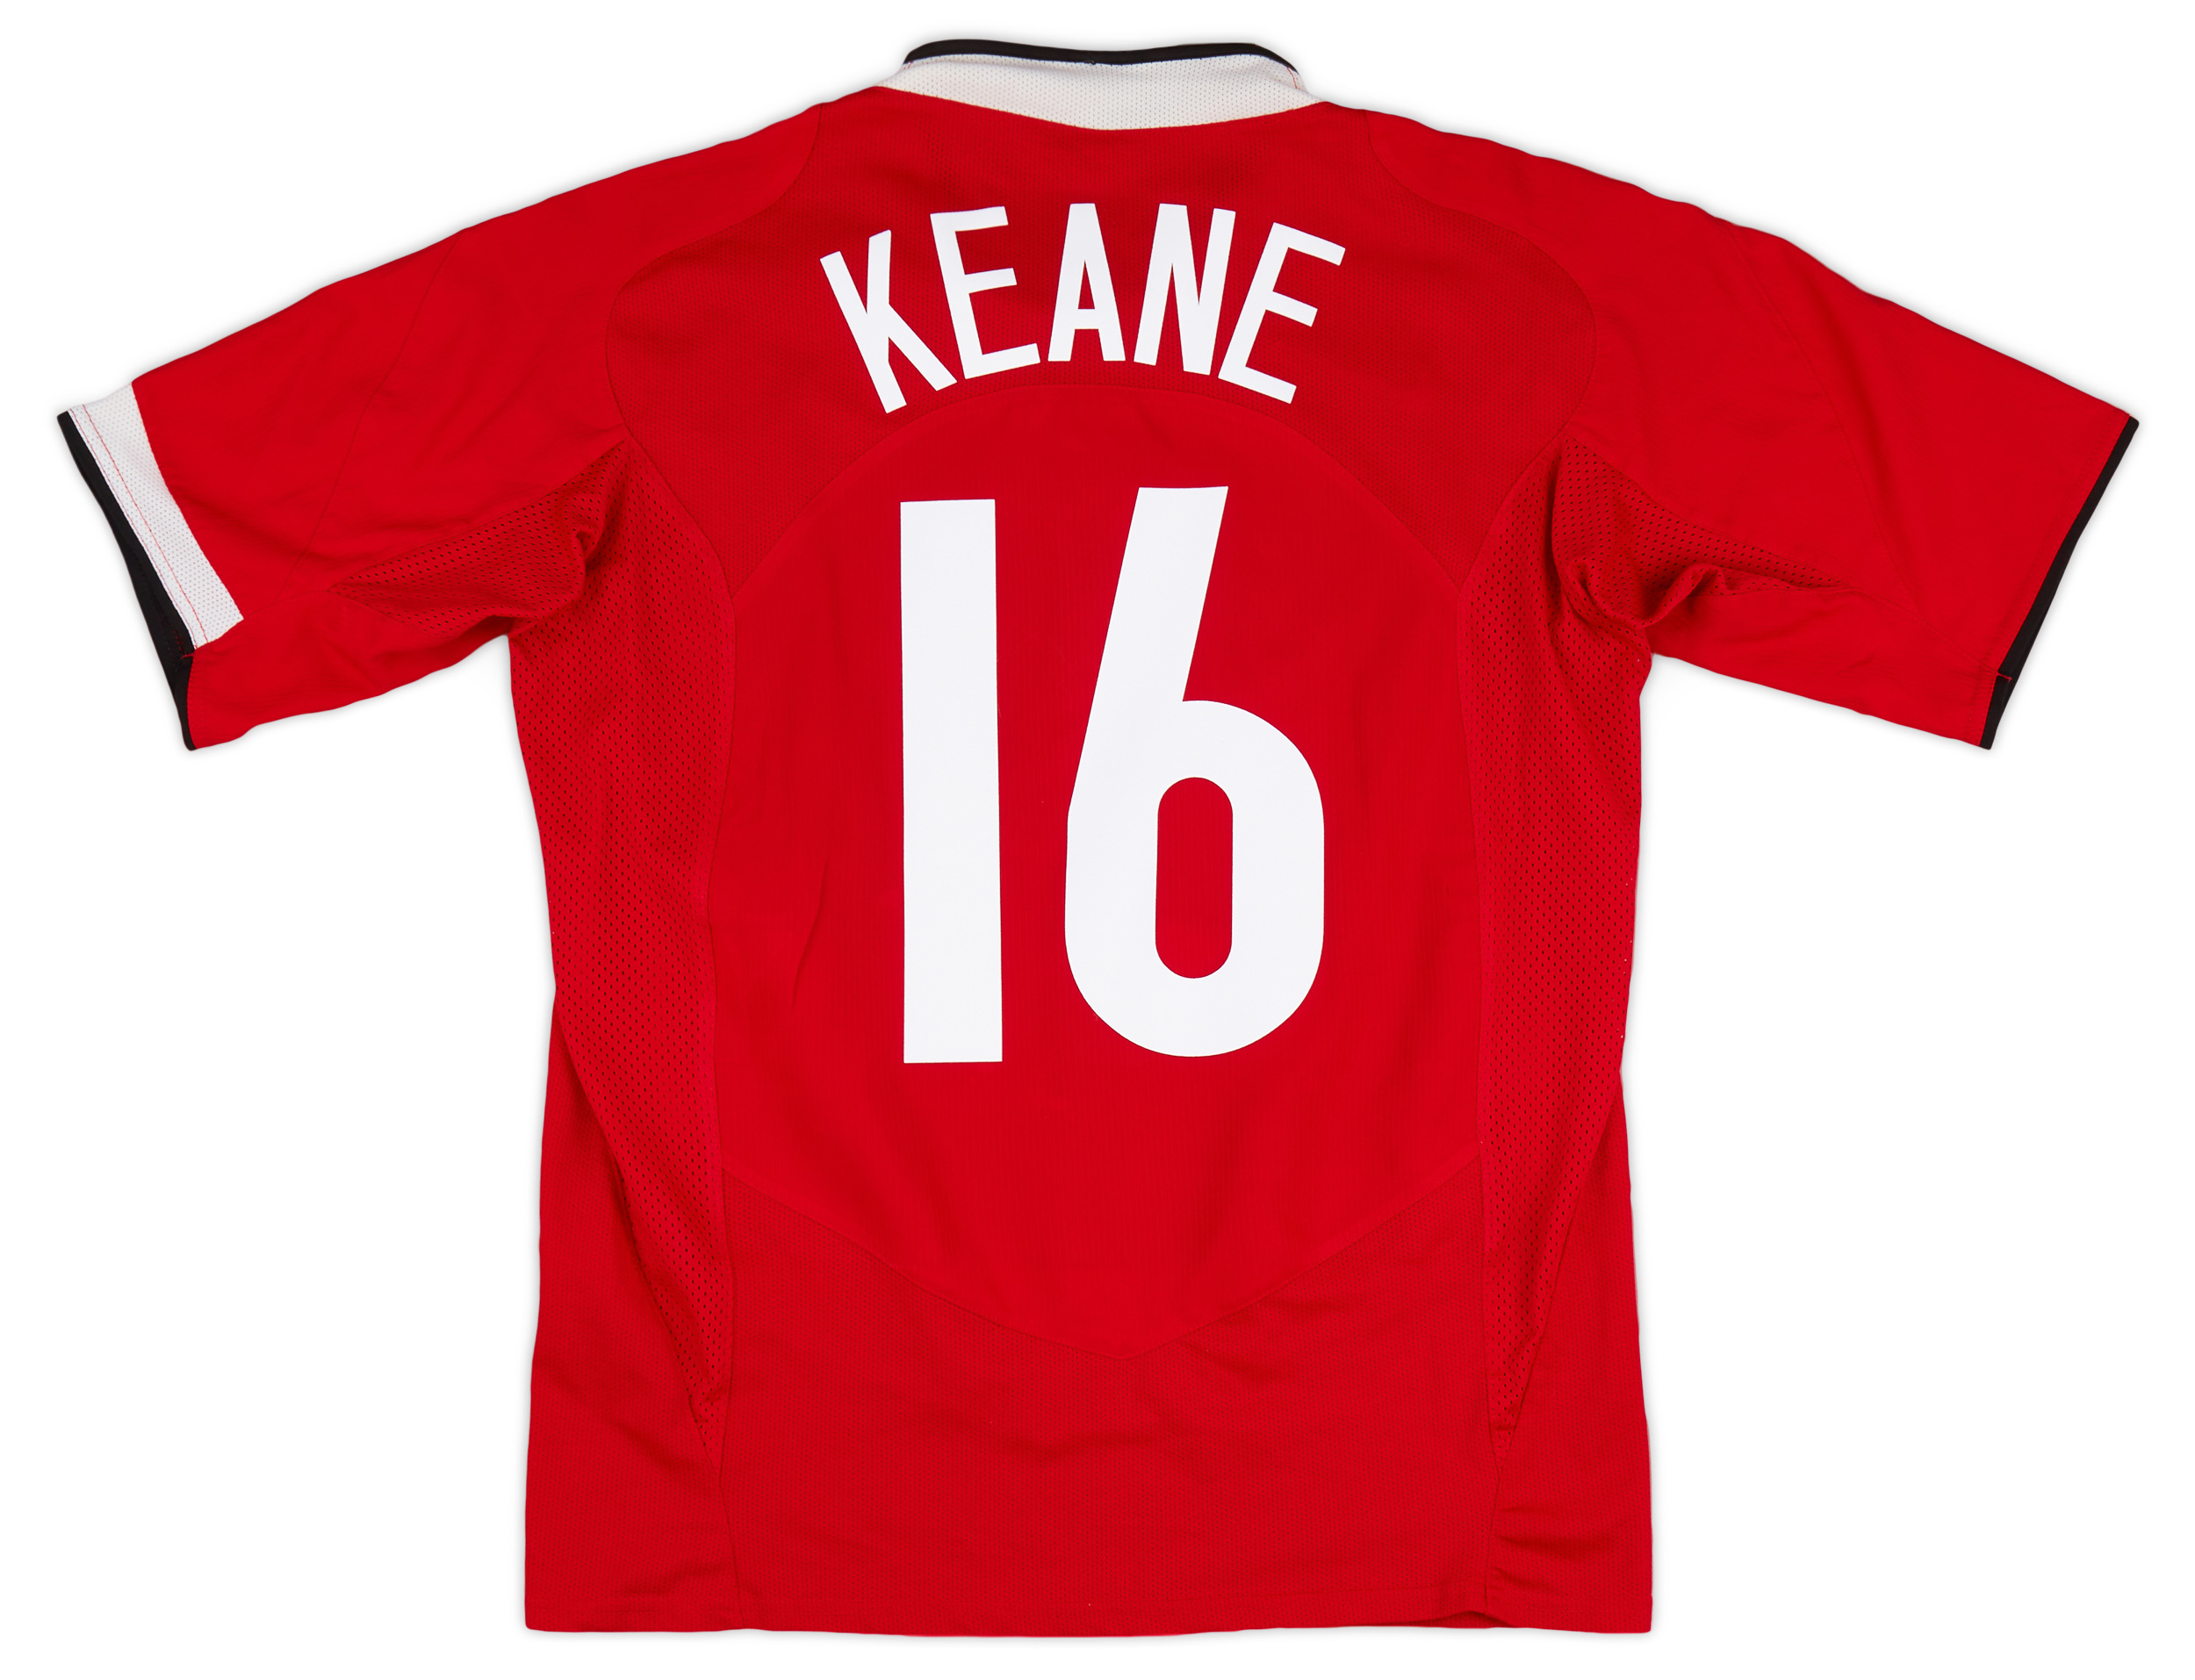 2004-06 Manchester United Home Shirt Keane #16 Excellent 9/10 (M)